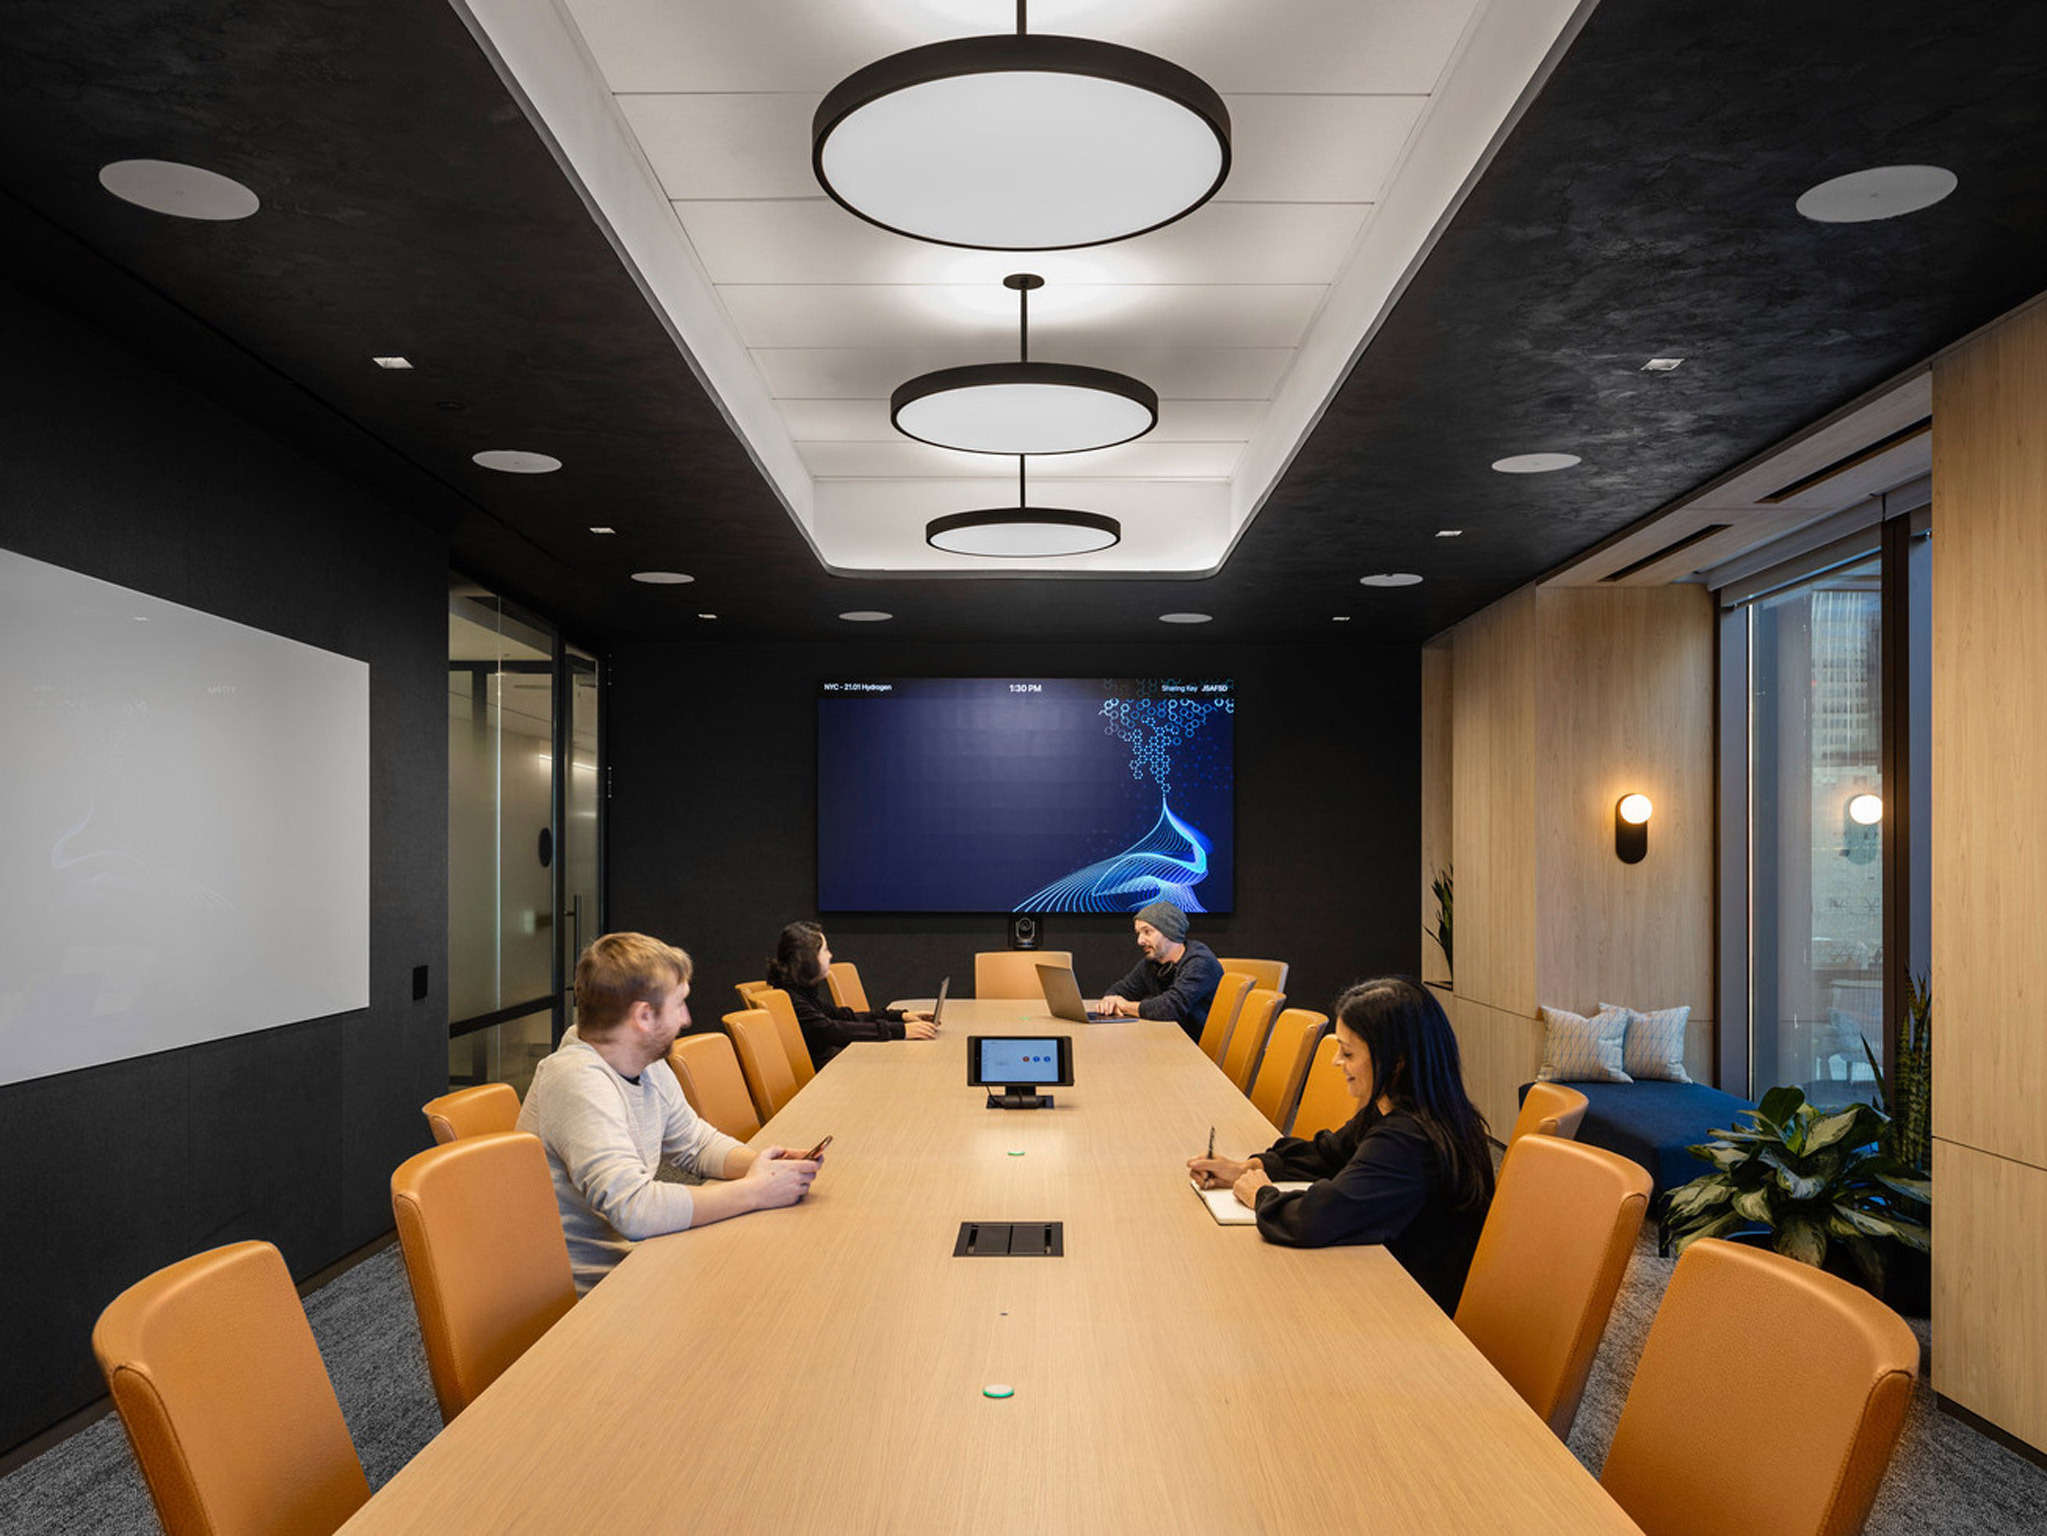 Contemporary boardroom with a sleek, dark ceiling punctuated by circular light fixtures; warm wood paneling intersects with black walls, surrounding a long, tangerine meeting table with attendees in a focused discussion.